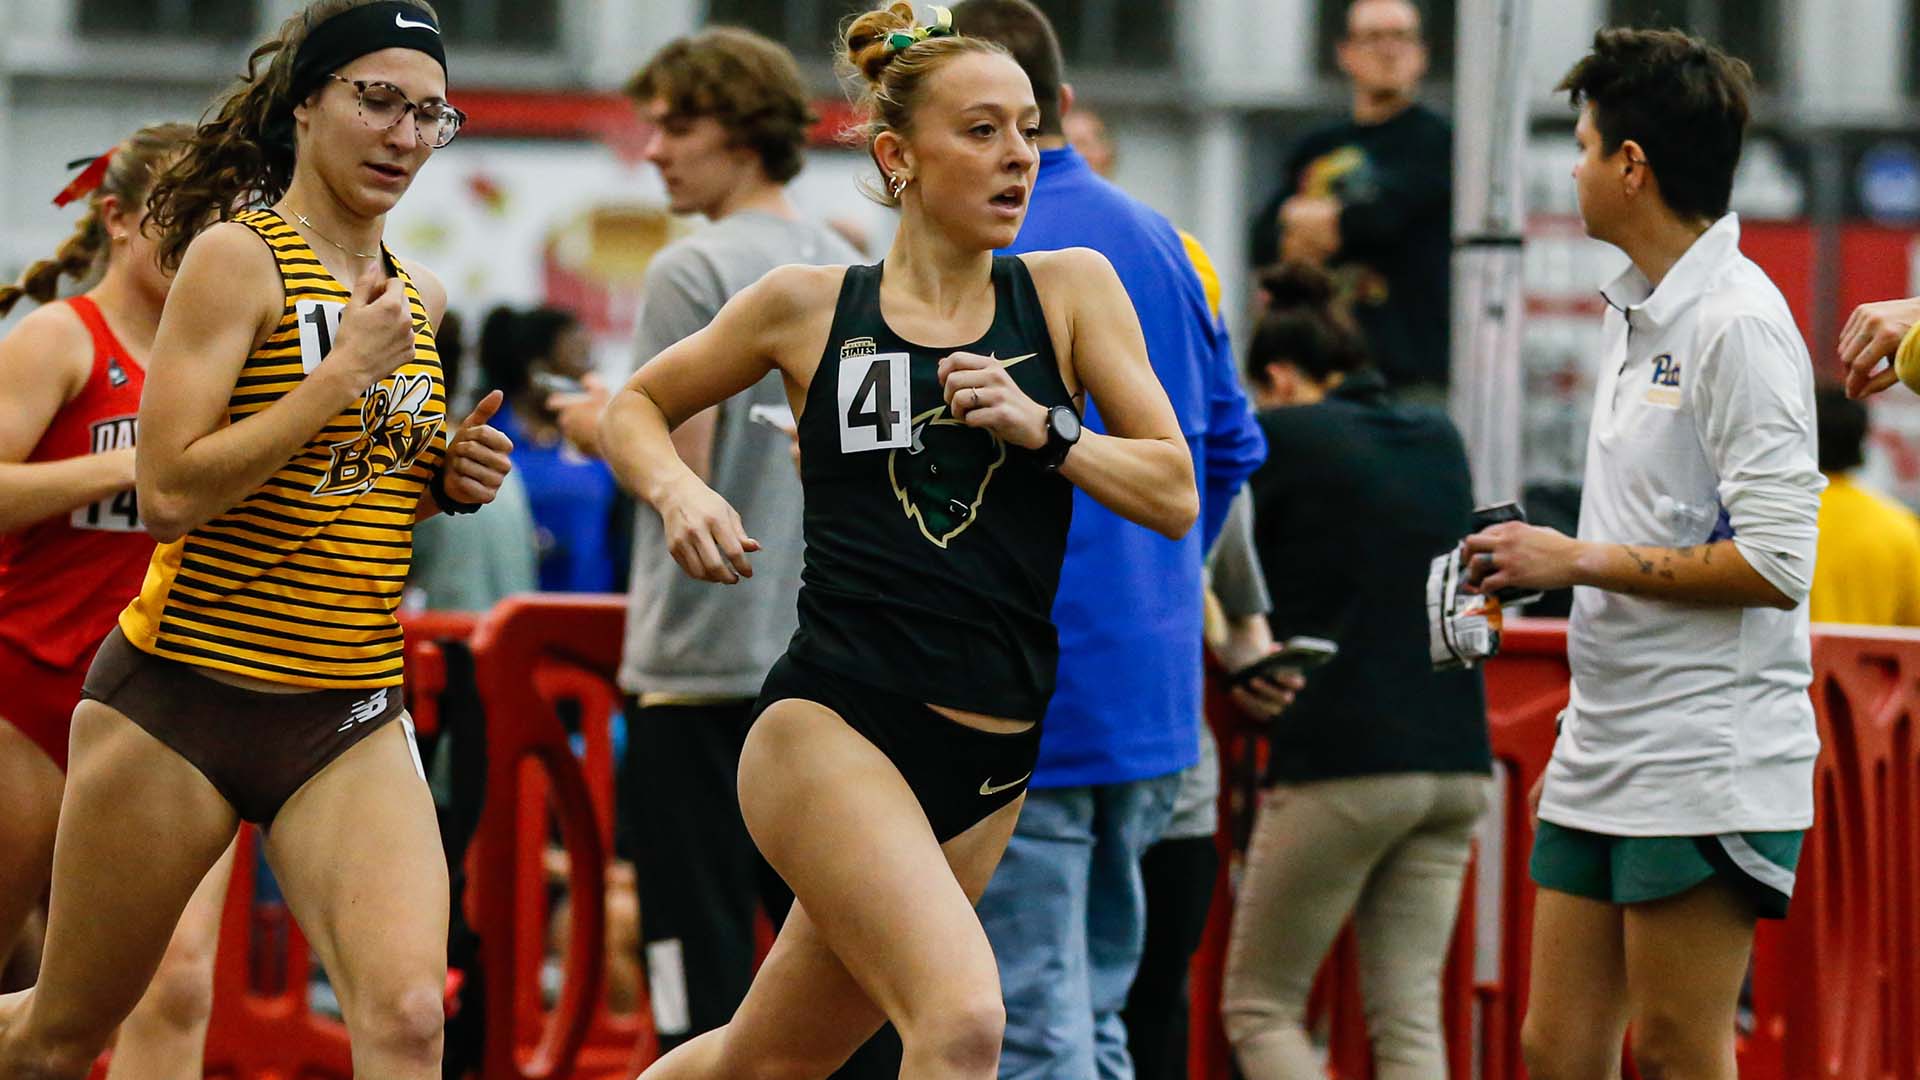 Plassio picked for RSC Women's Indoor Track Athlete of the Week